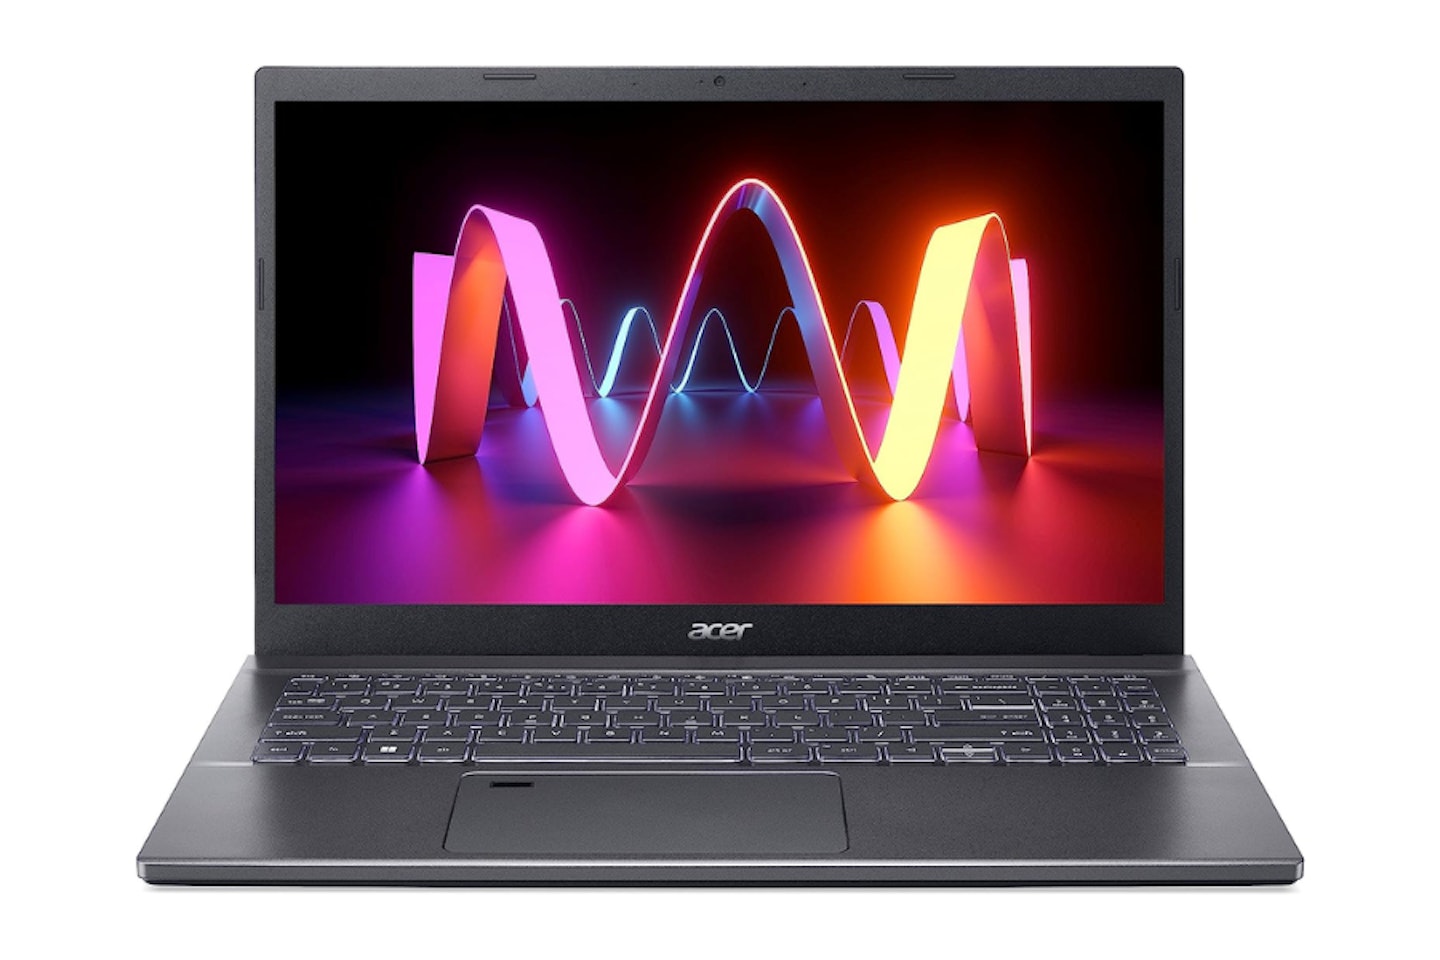  Acer Aspire 5 A515-57 15.6 Inch Laptop